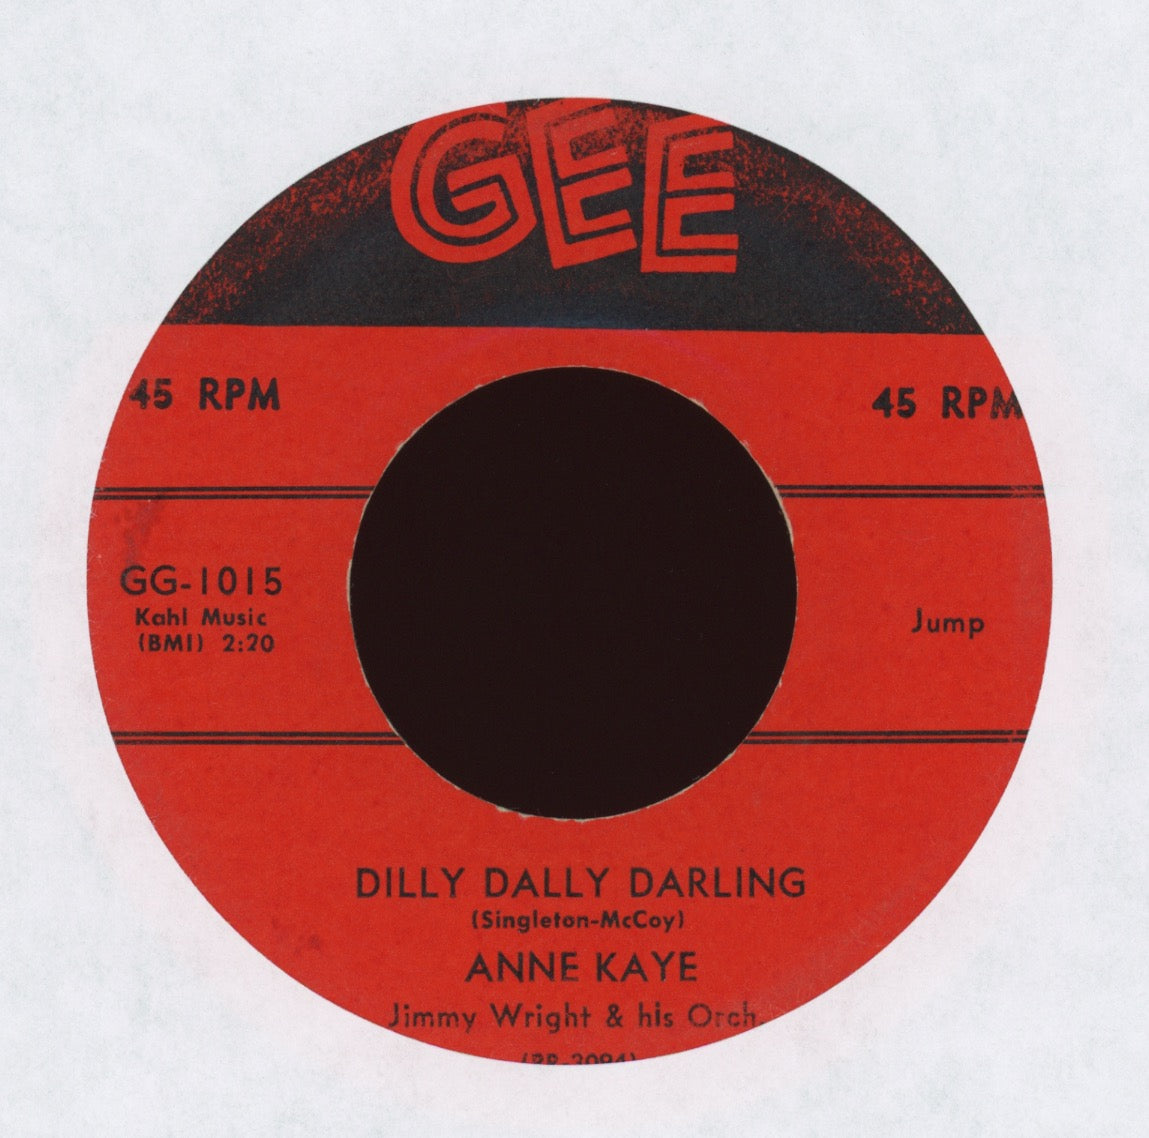 Anne Kaye - Dilly Dally Darling on Gee